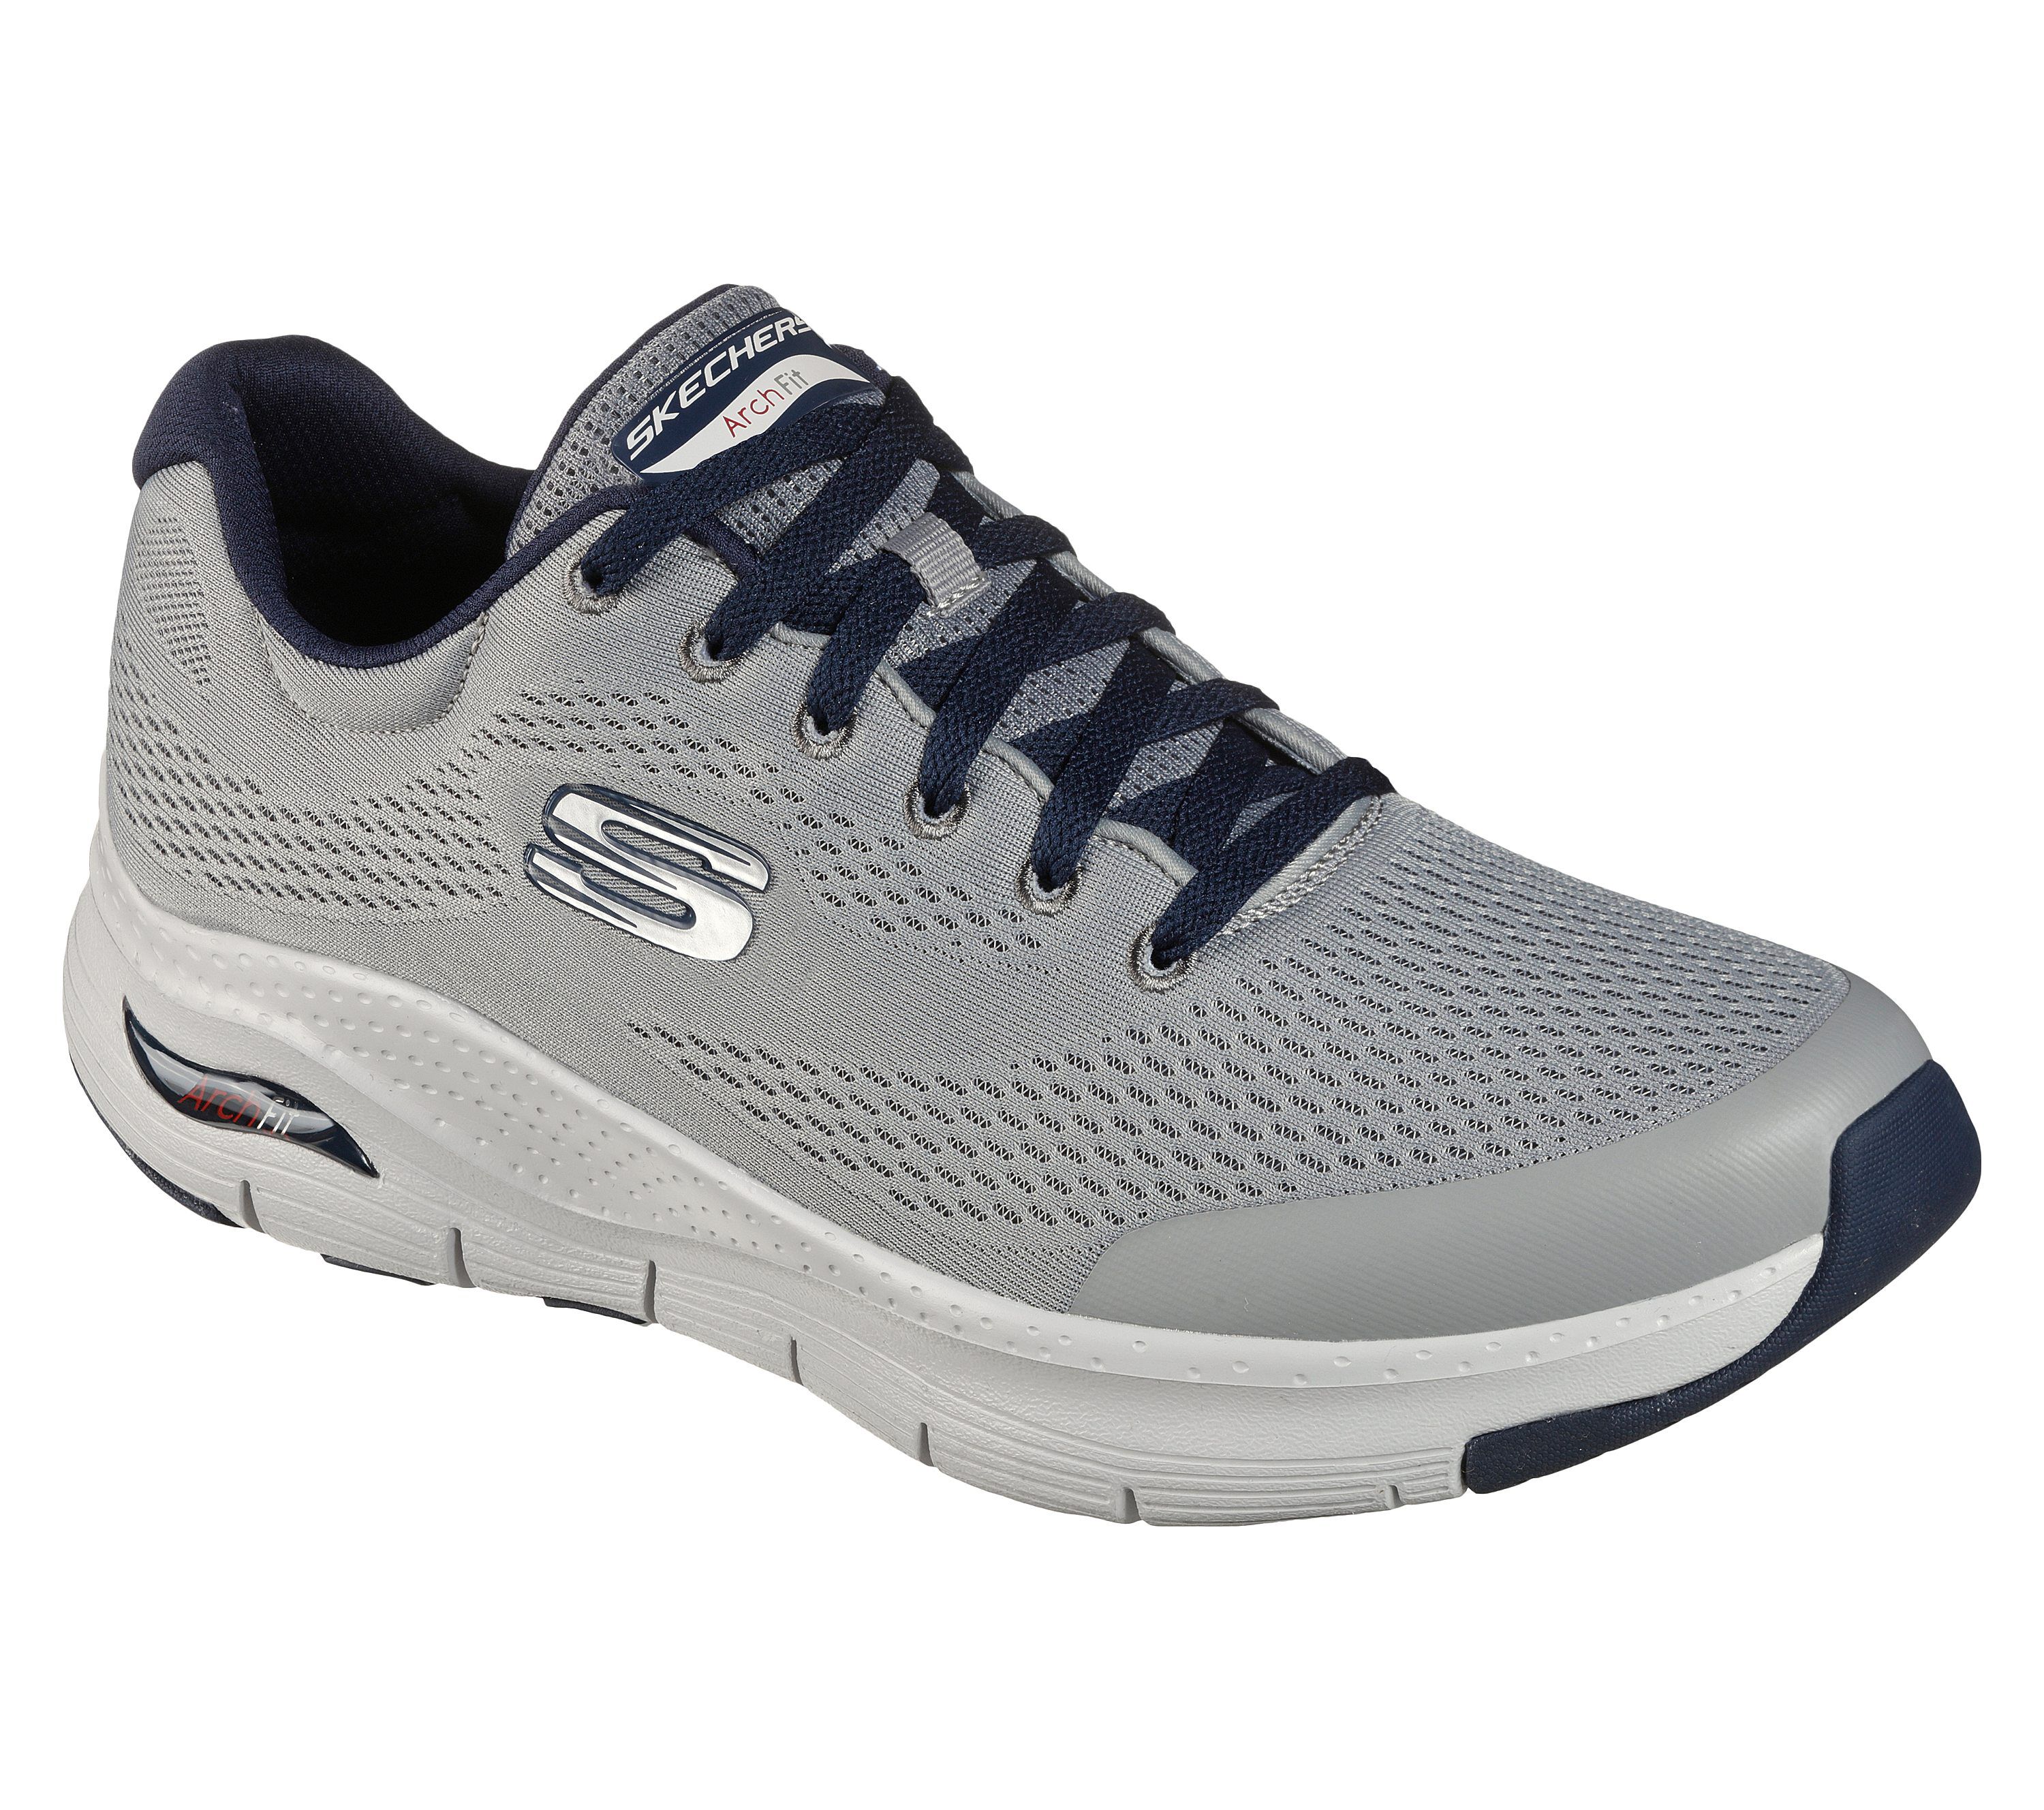 skechers extra wide tennis shoes